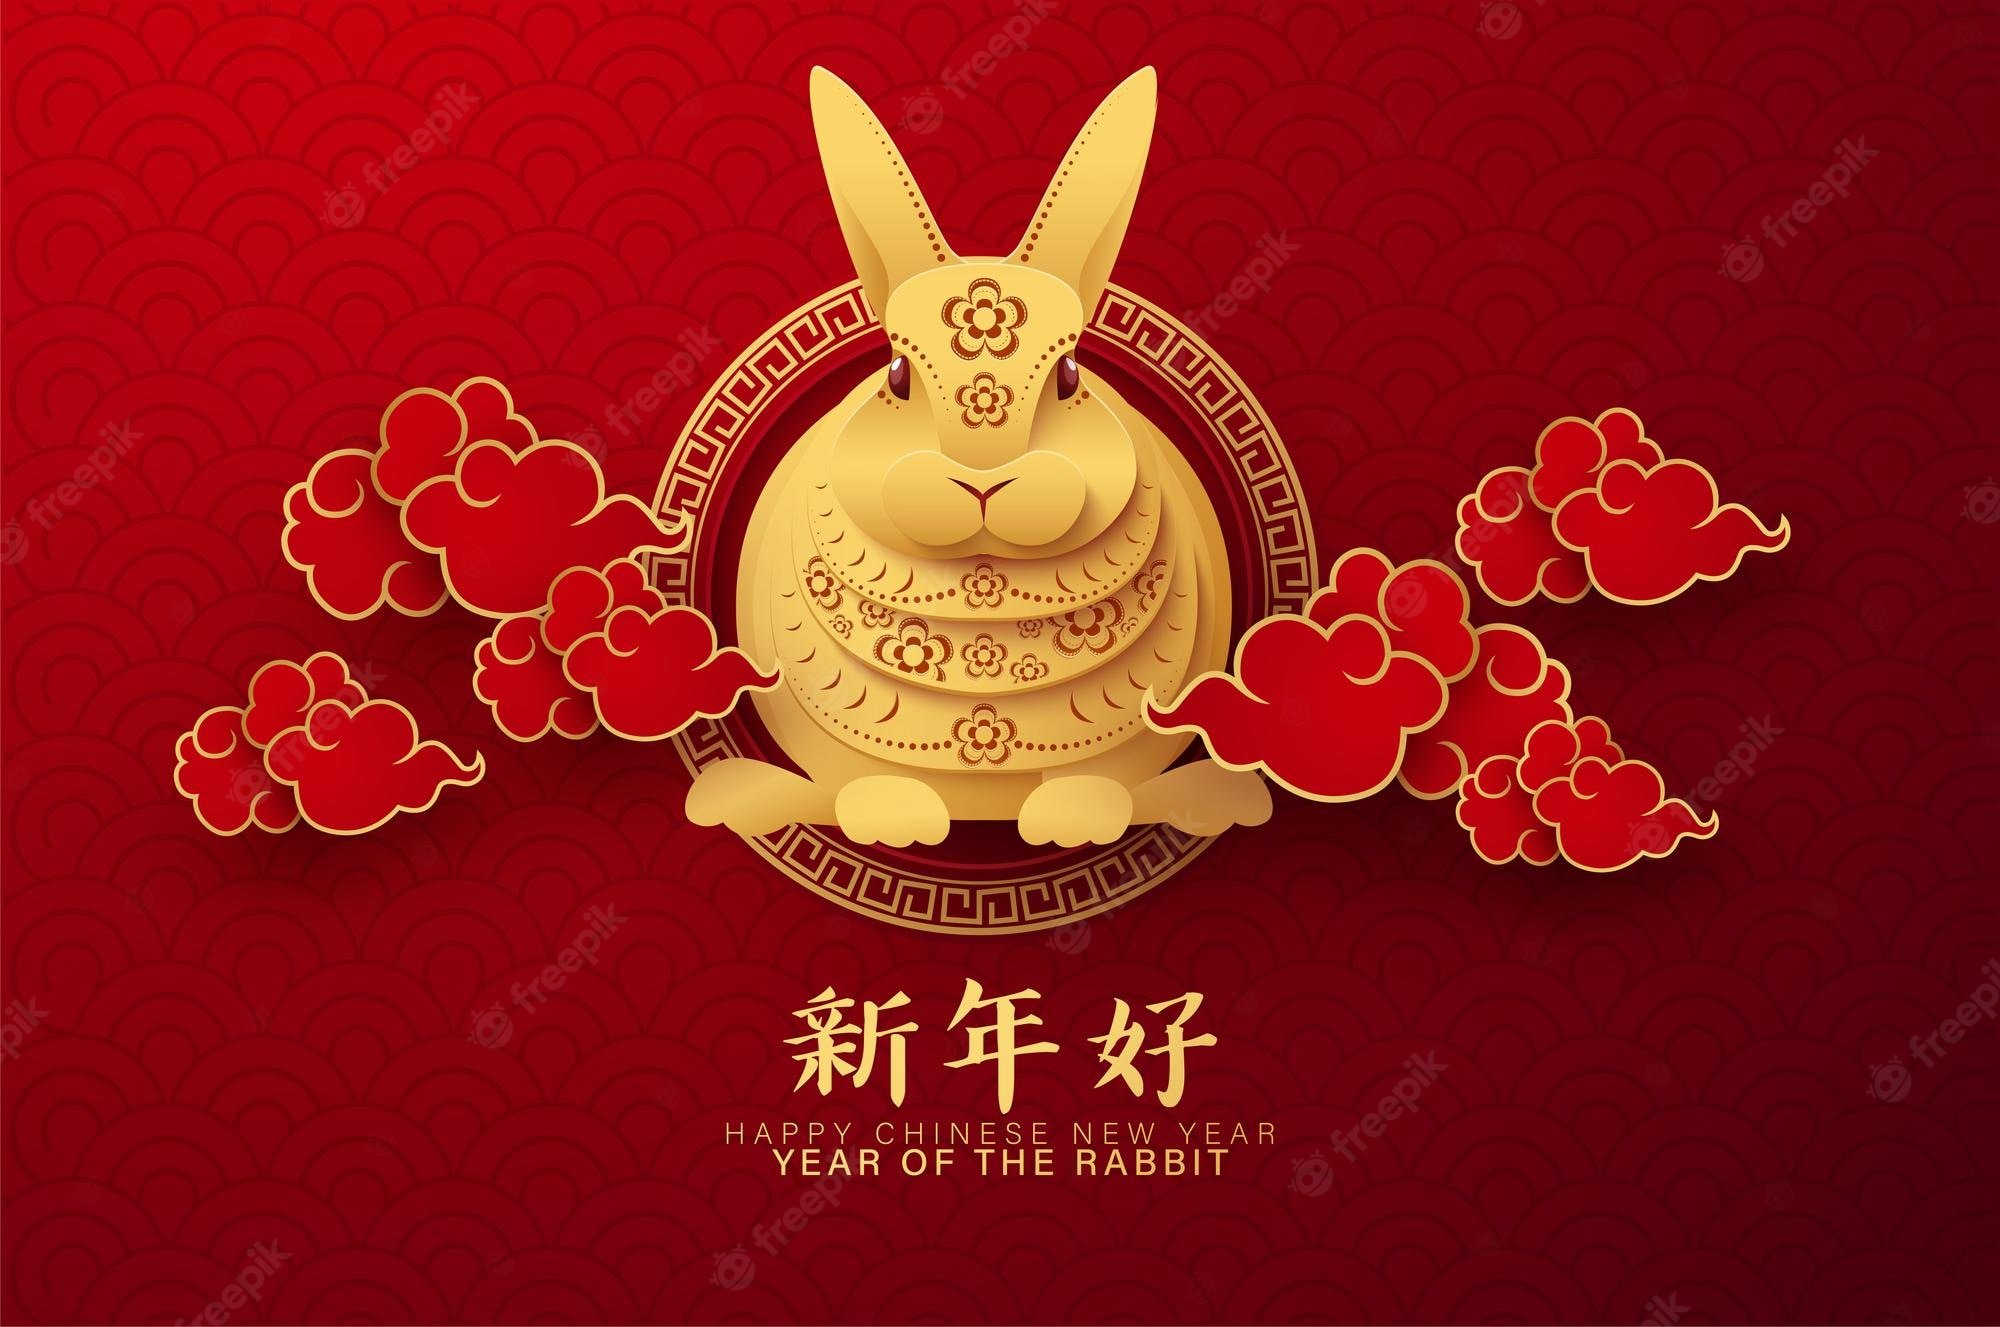 2023 Year of the Rabbit Wallpaper  Pudgypeachcats Kofi Shop  Kofi   Where creators get support from fans through donations memberships shop  sales and more The original Buy Me a Coffee Page